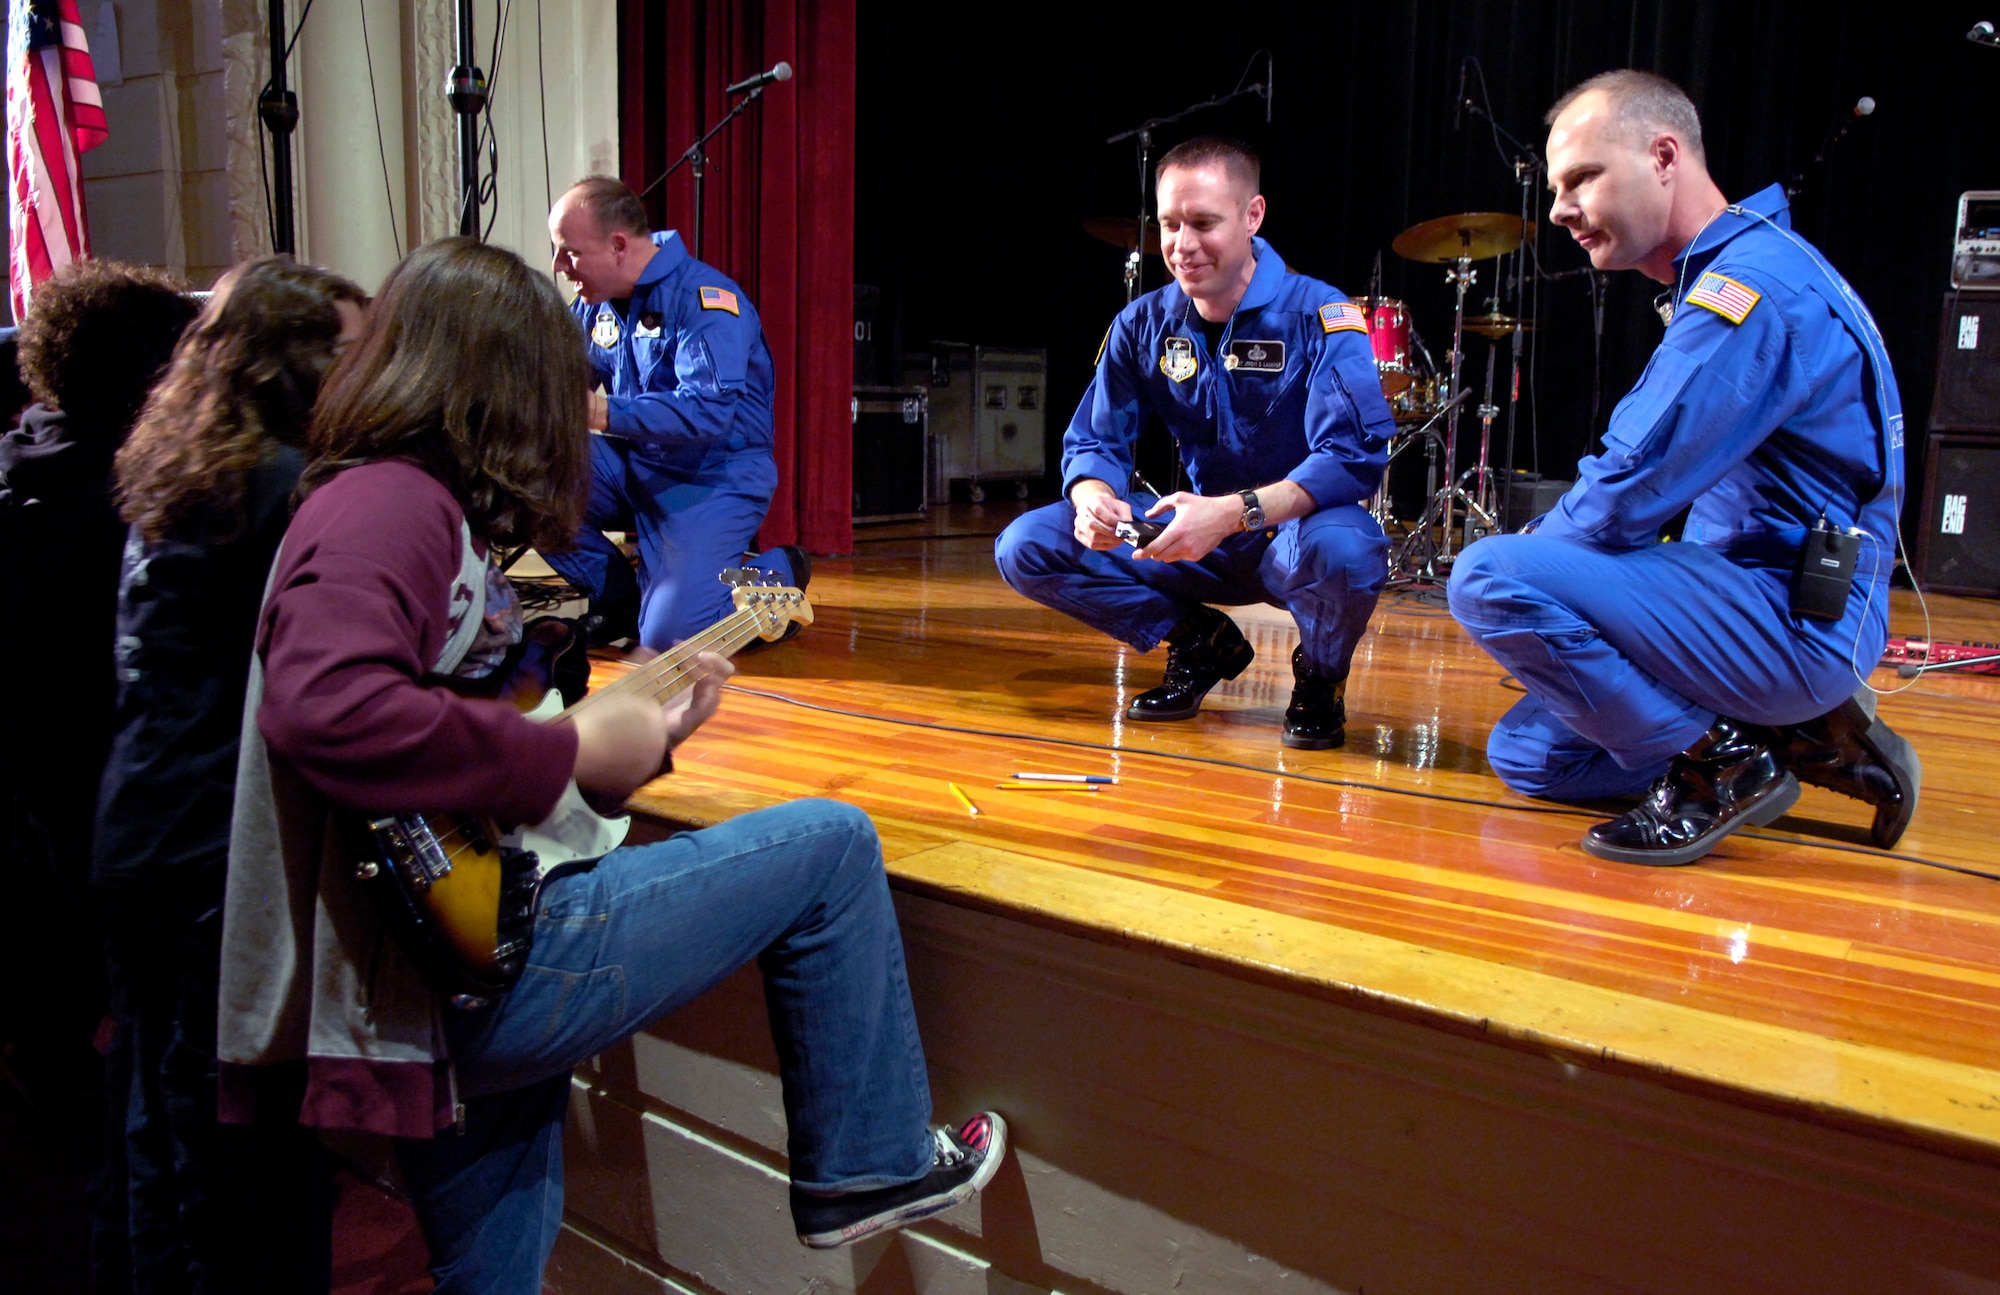 Master Sgt. Jeremy Laukhuf (left) and Tech. Sgt. Stephen Brannen talk with students from Mamaroneck High School in New York following a concert at the school Nov. 22.  The Airmen are members of the U.S. Air Force Academy Band, Blue Steel. The performance was in celebration of the Air Force's 60th Anniversary. (U.S. Air Force photo/Senior Airman Brian Ferguson)
